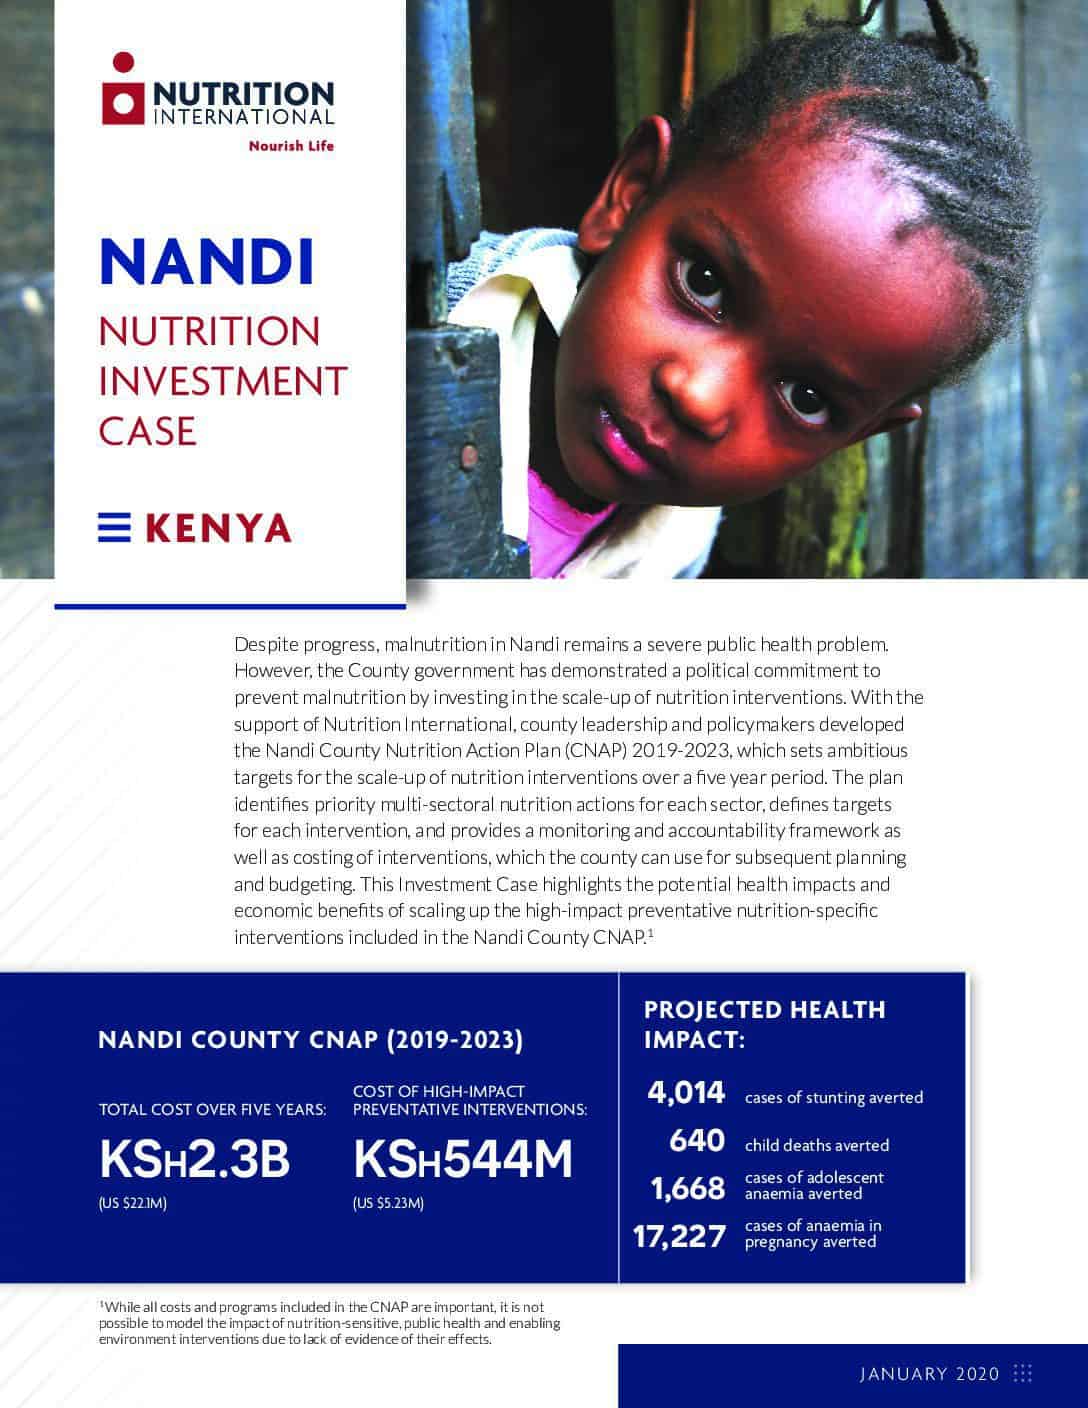 Nandi County Nutrition Investment Case thumbnail